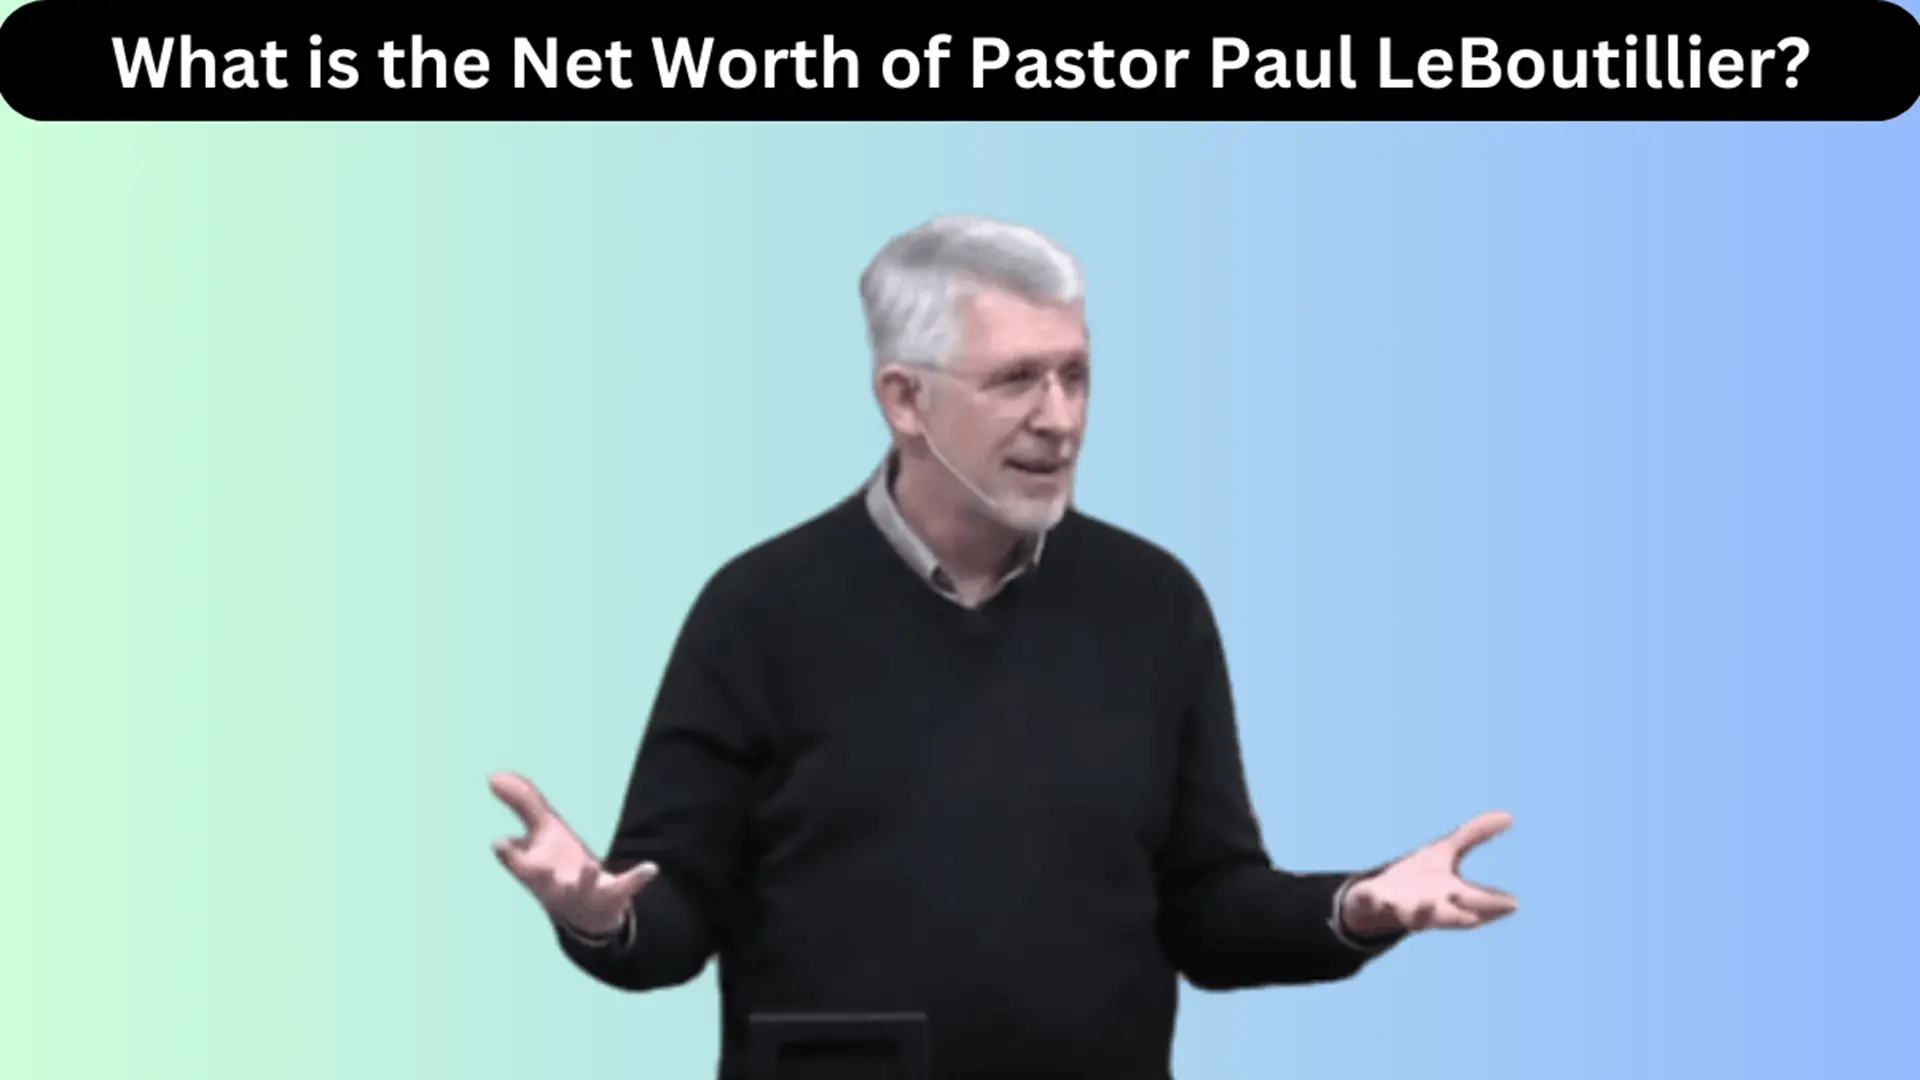 What is the Net Worth of Pastor Paul LeBoutillier